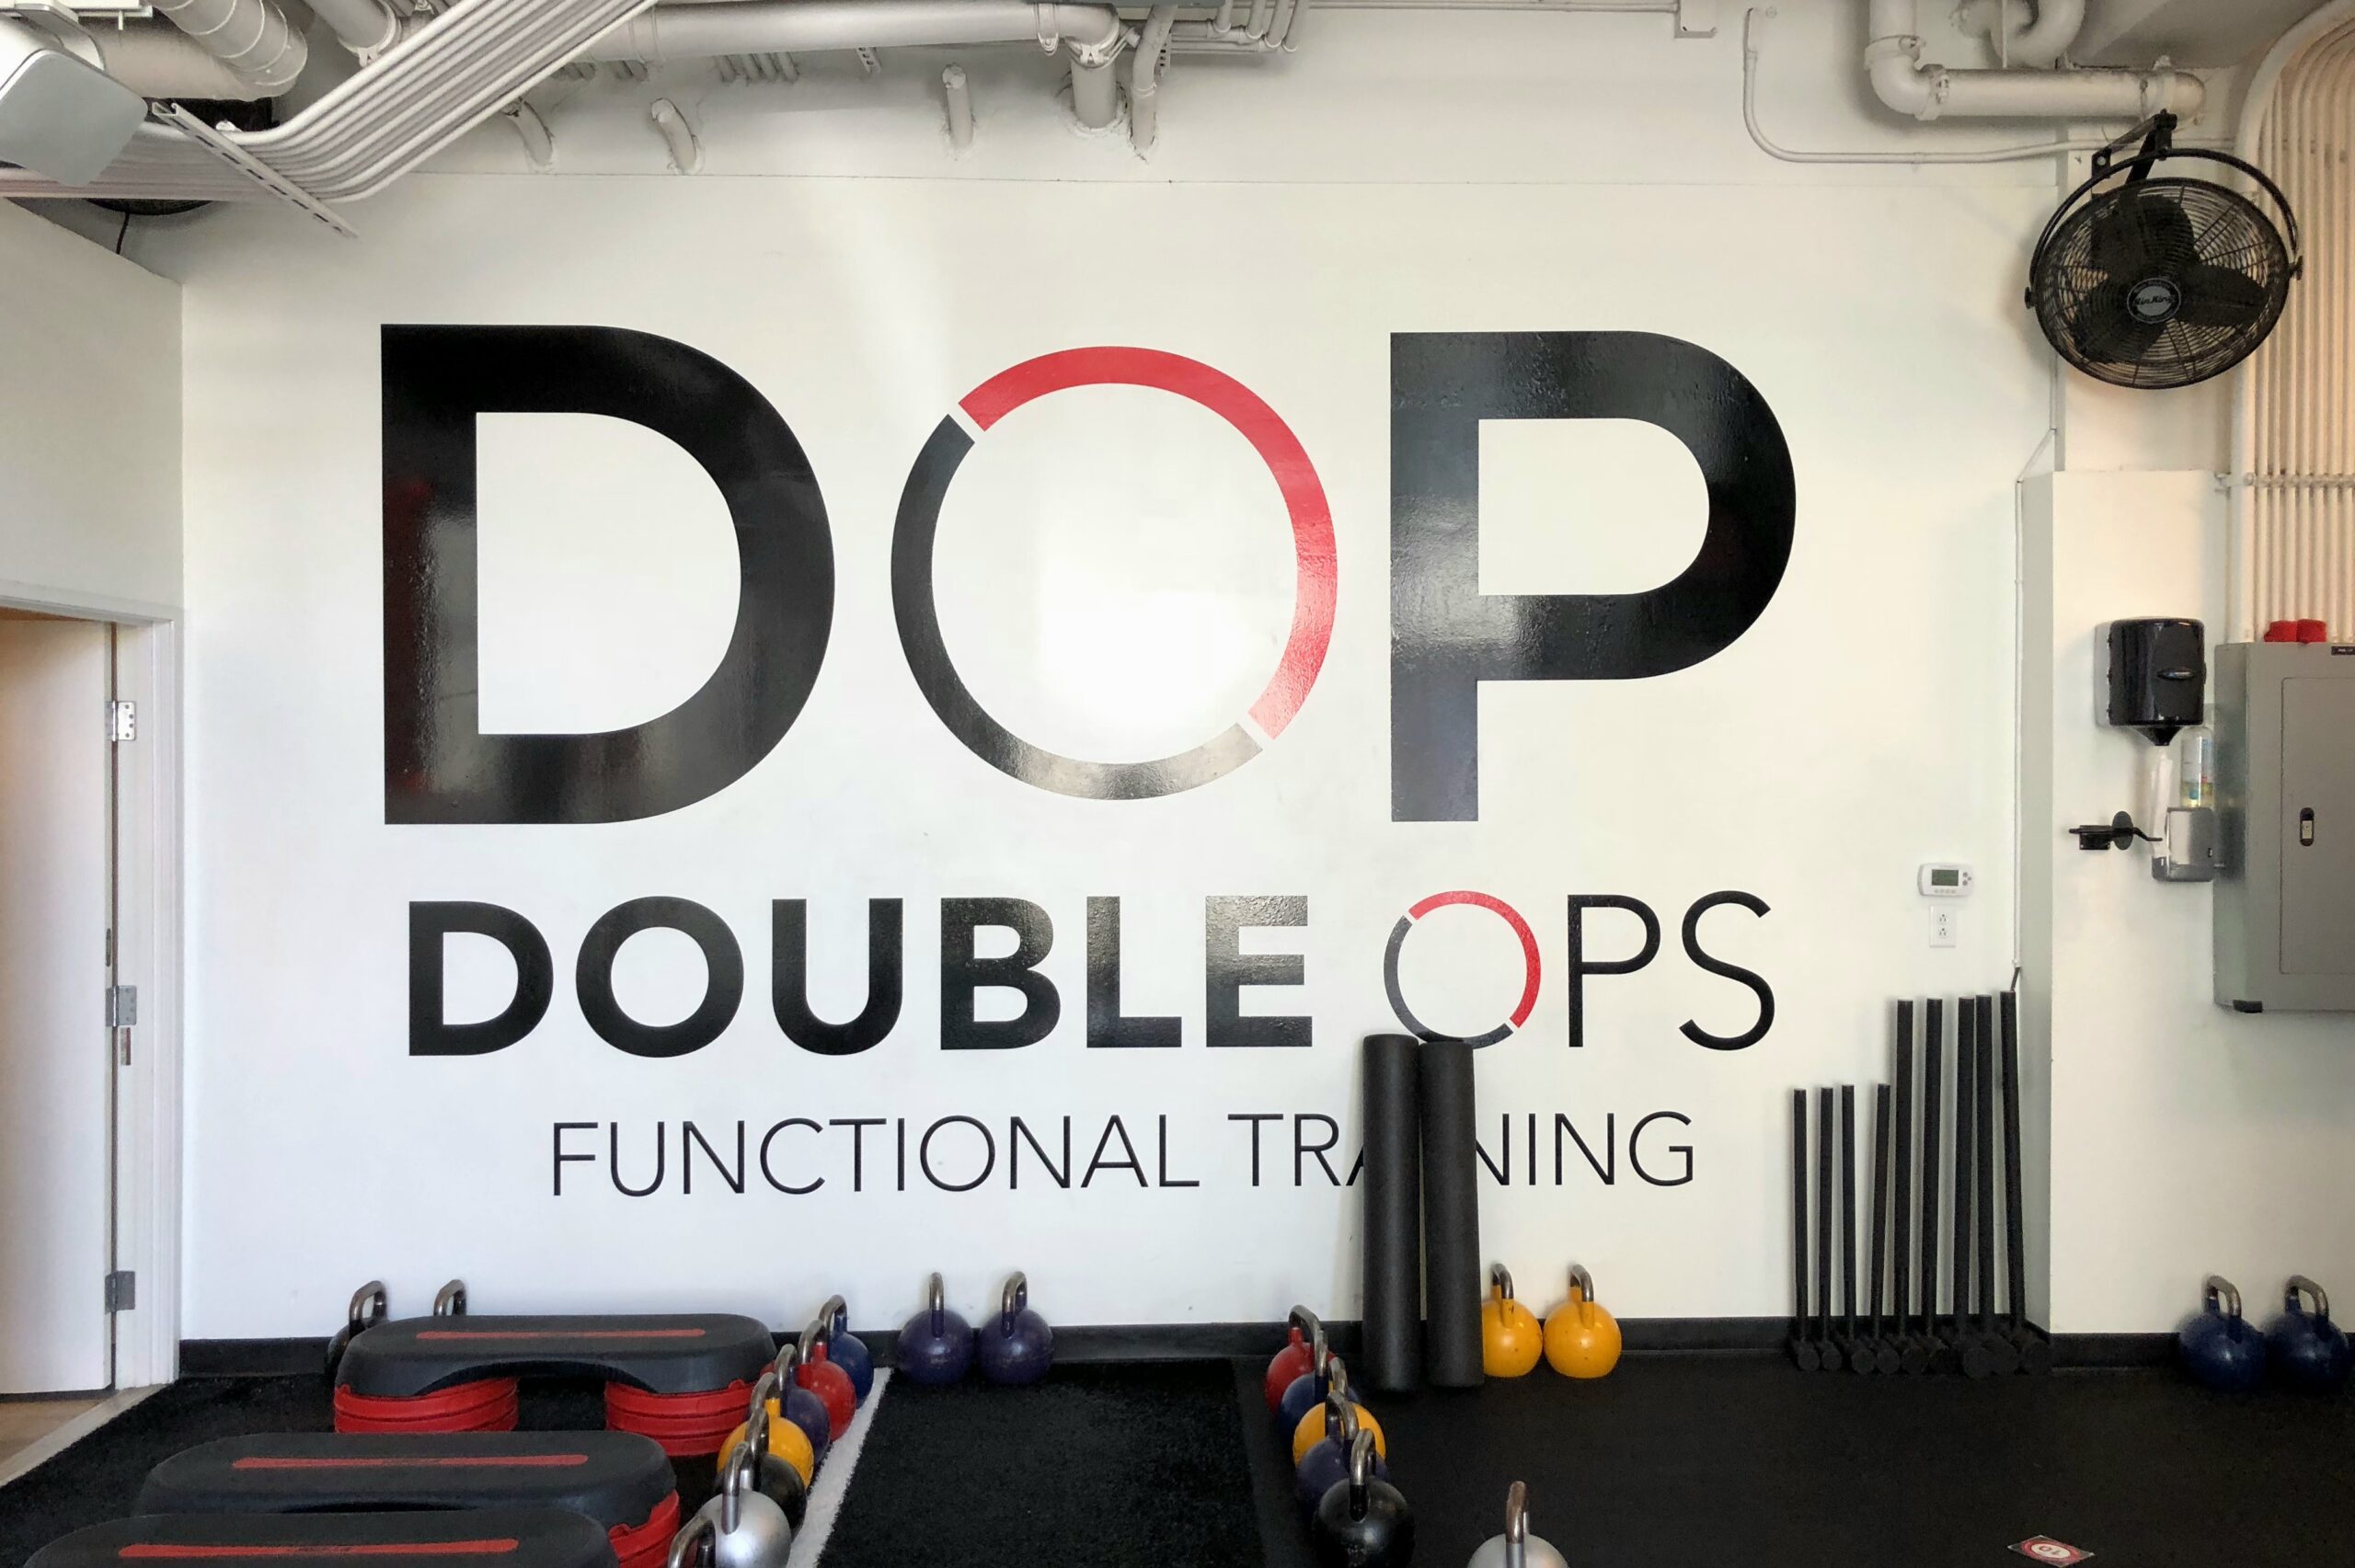 Vinyl lobby sign on wall for Double Ops